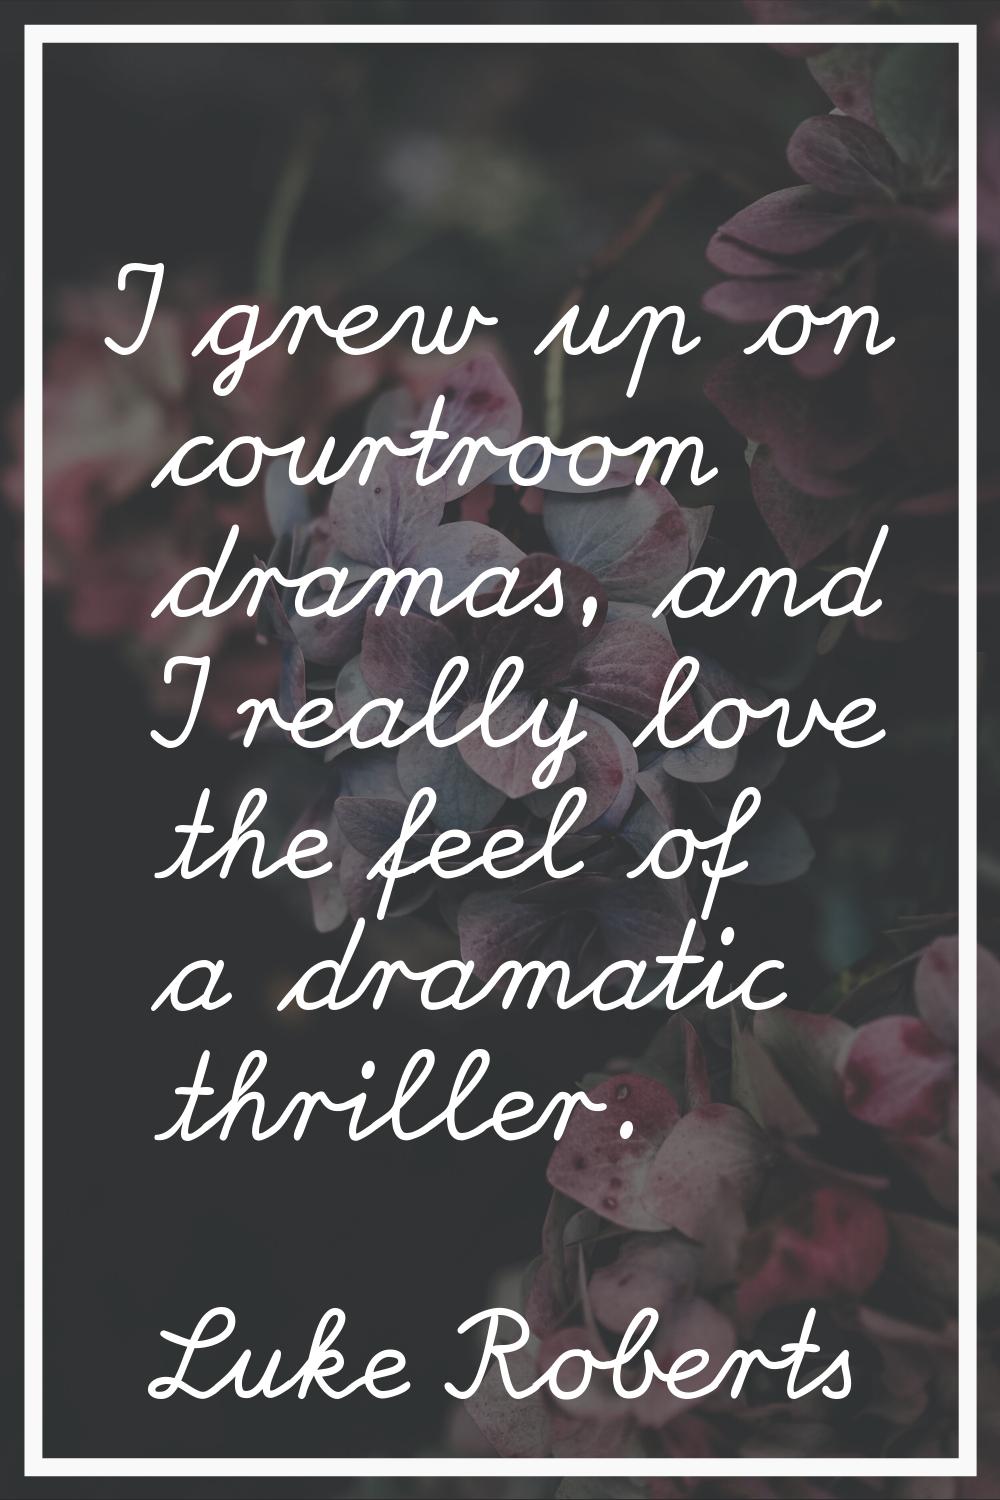 I grew up on courtroom dramas, and I really love the feel of a dramatic thriller.